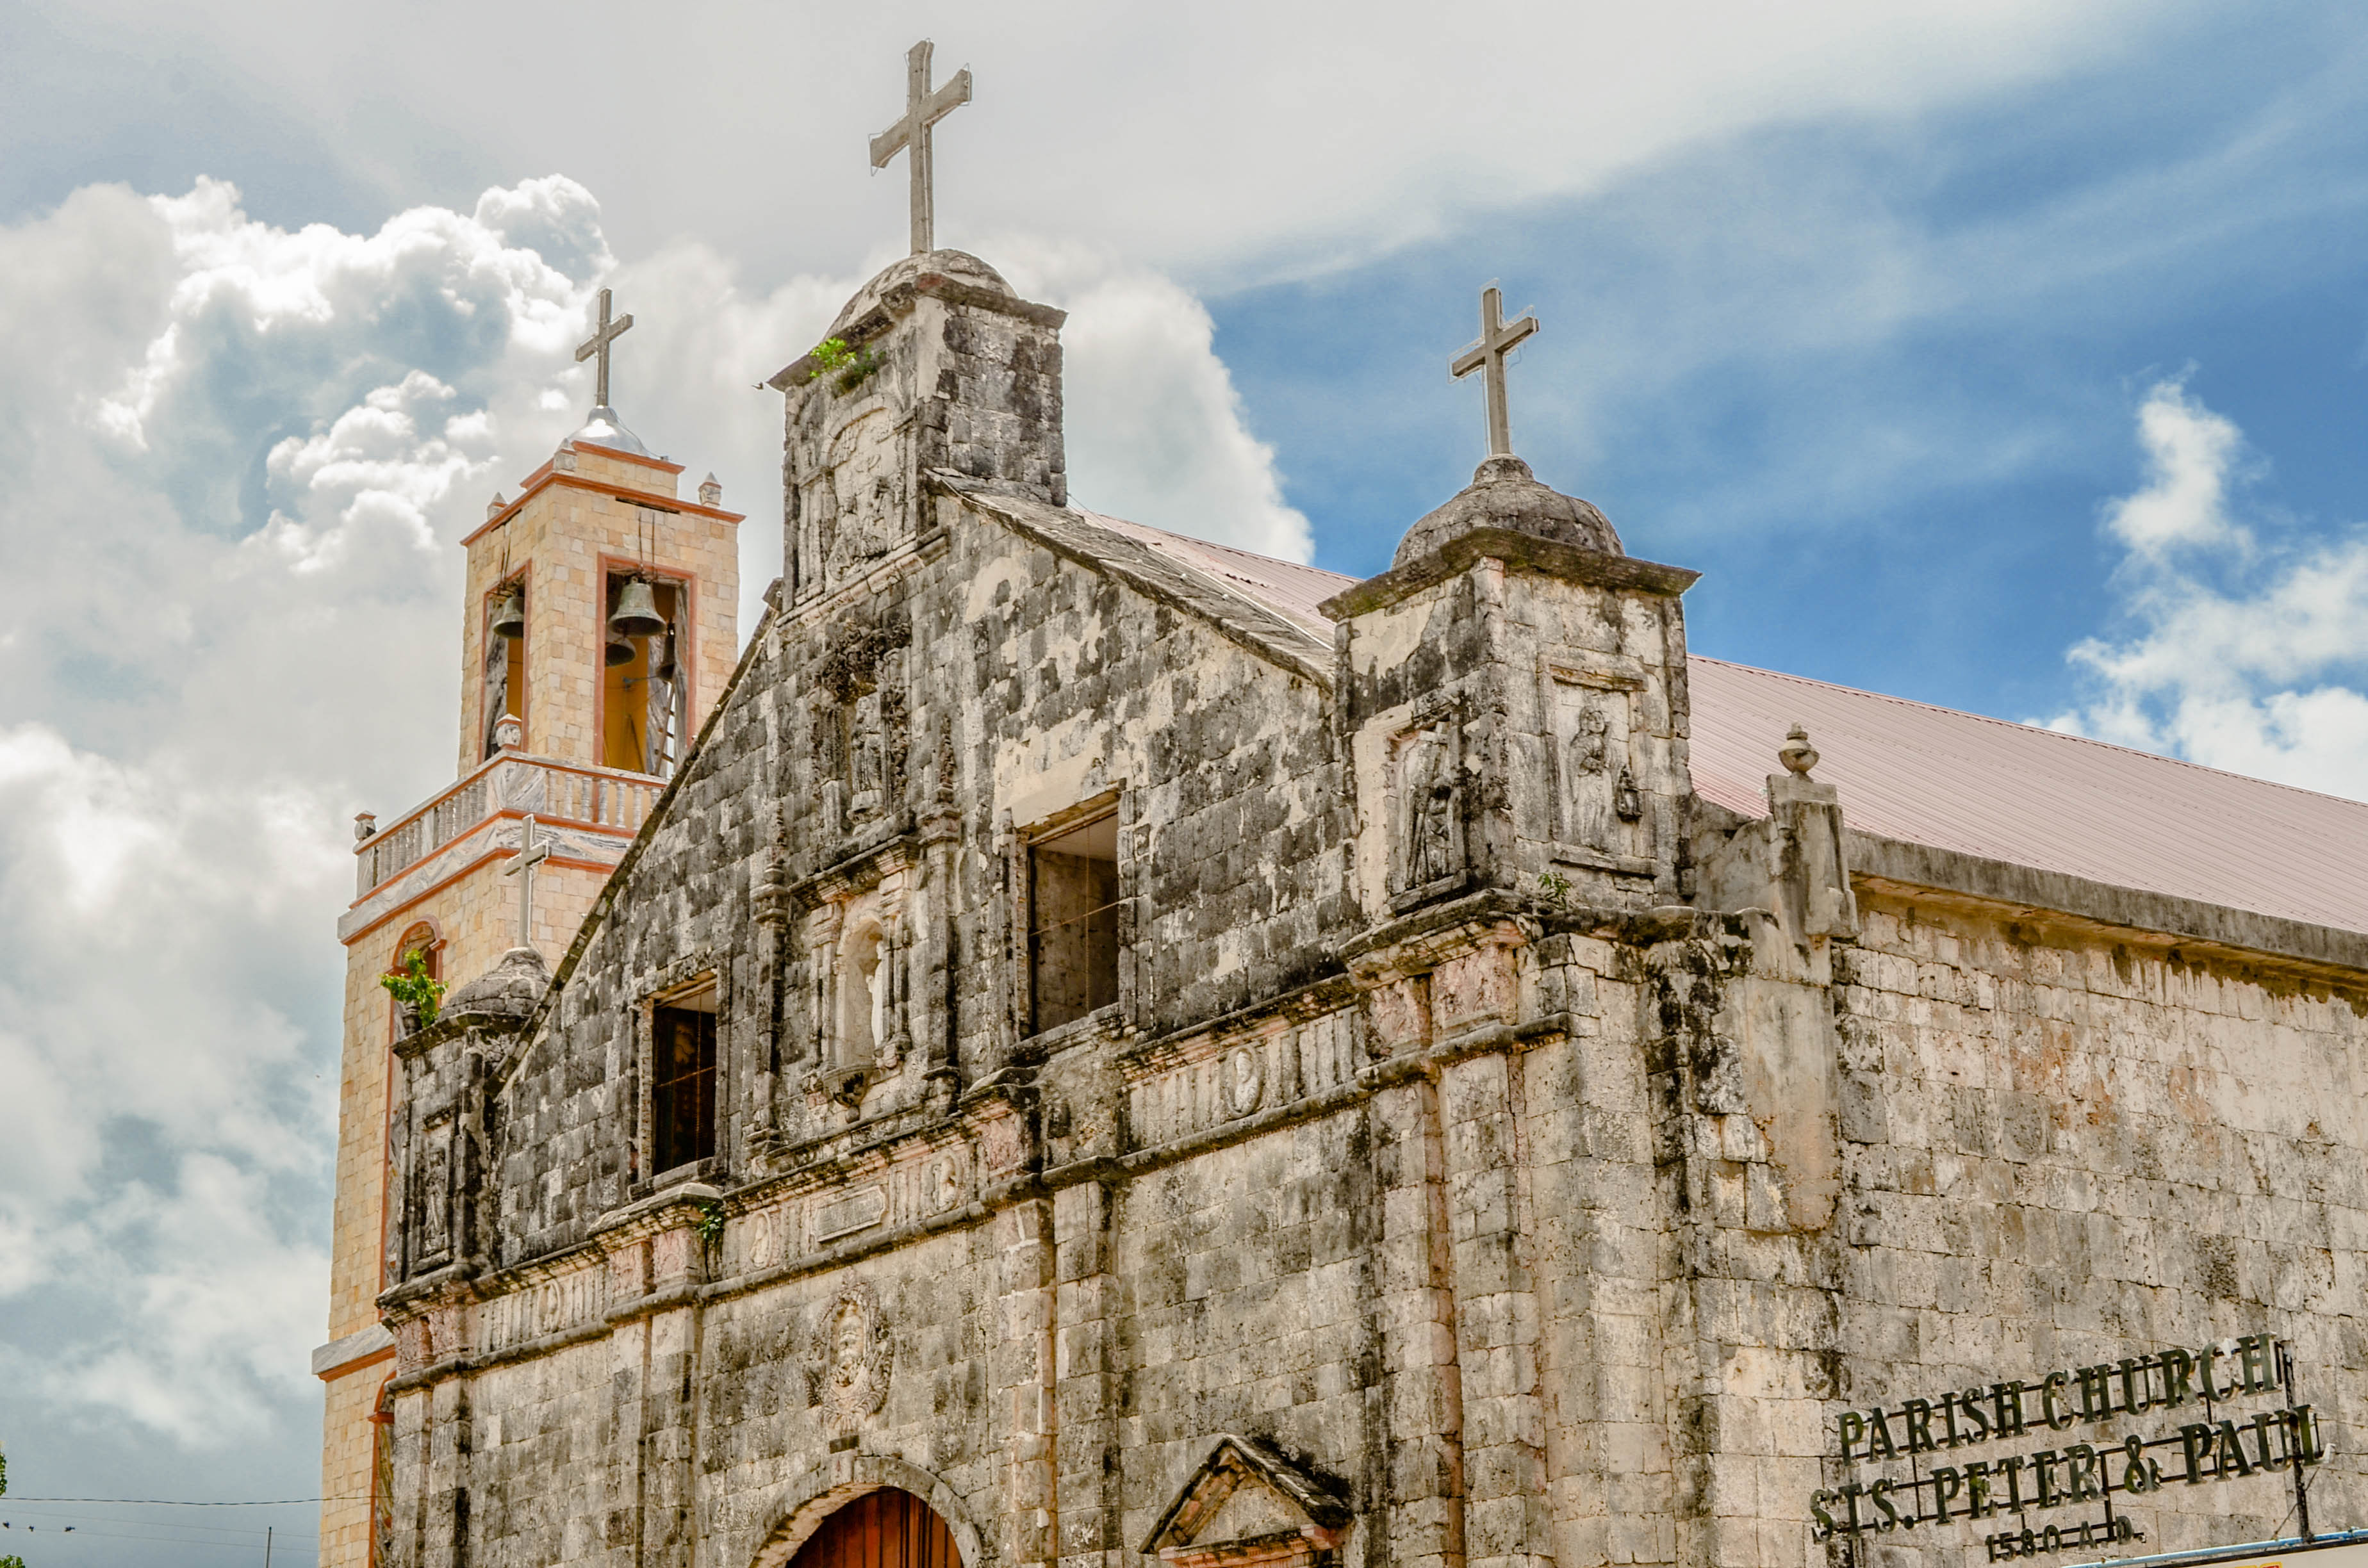 Why Is St Peter And Paul Church Bantayan Island So Famous?